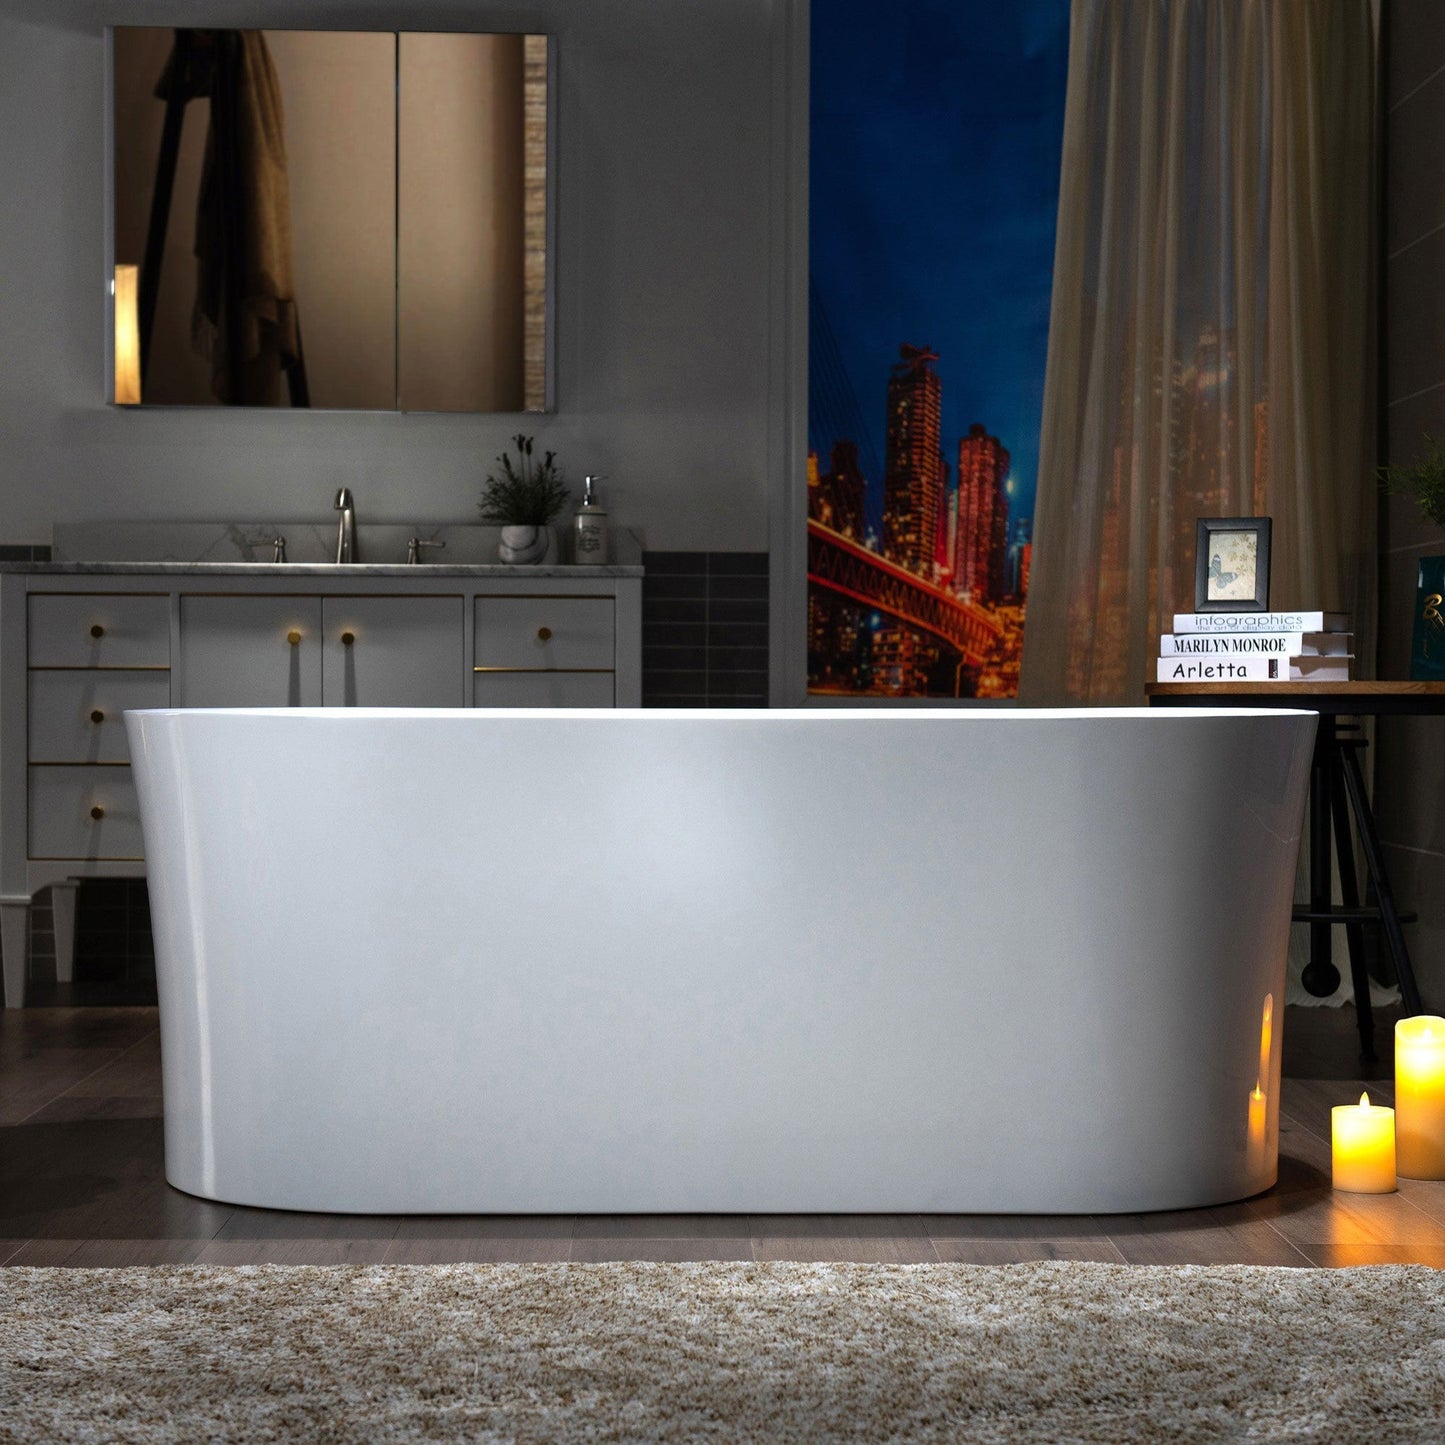 WoodBridge B0058 59" White Acrylic Freestanding Contemporary Soaking Bathtub With Brushed Nickel Overflow and Drain